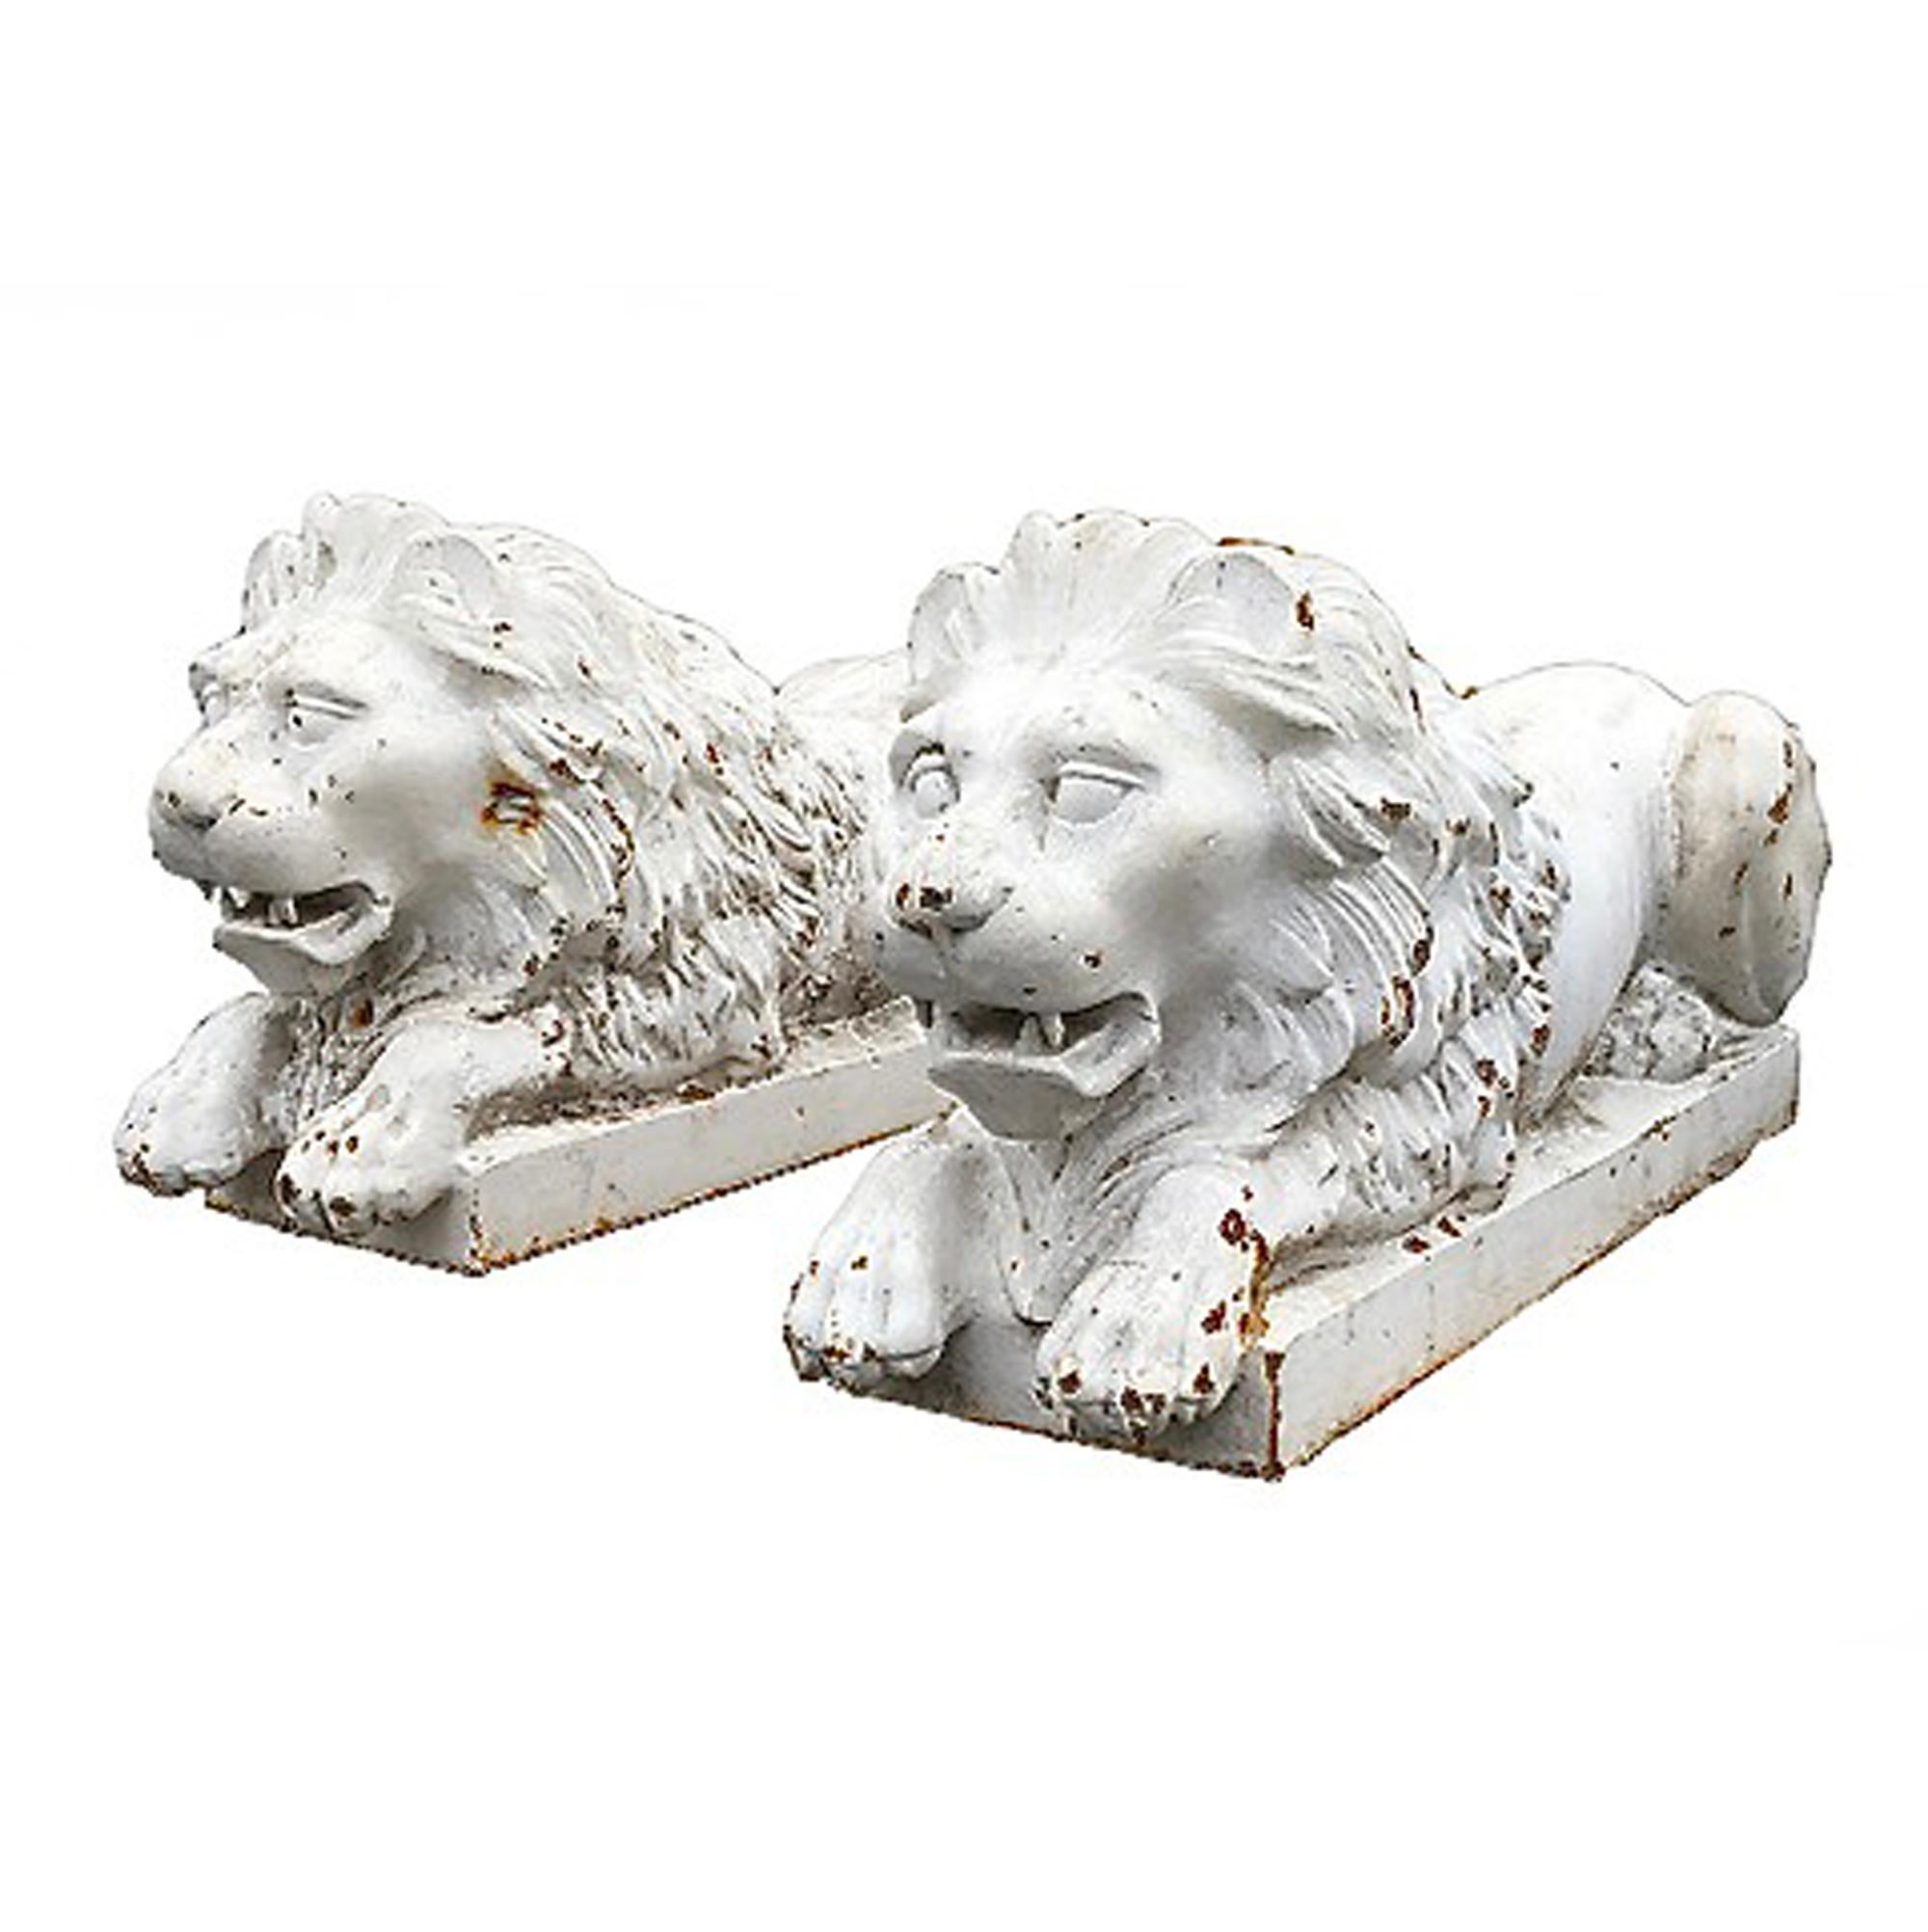 This pair of c.1880 American cast-iron garden lions was made in a foundry in the northeast, possibly in New York or Pennsylvania. Although some call this form a J. W. Fiske design, these are not foundry marked. The deep and crisp cast details are